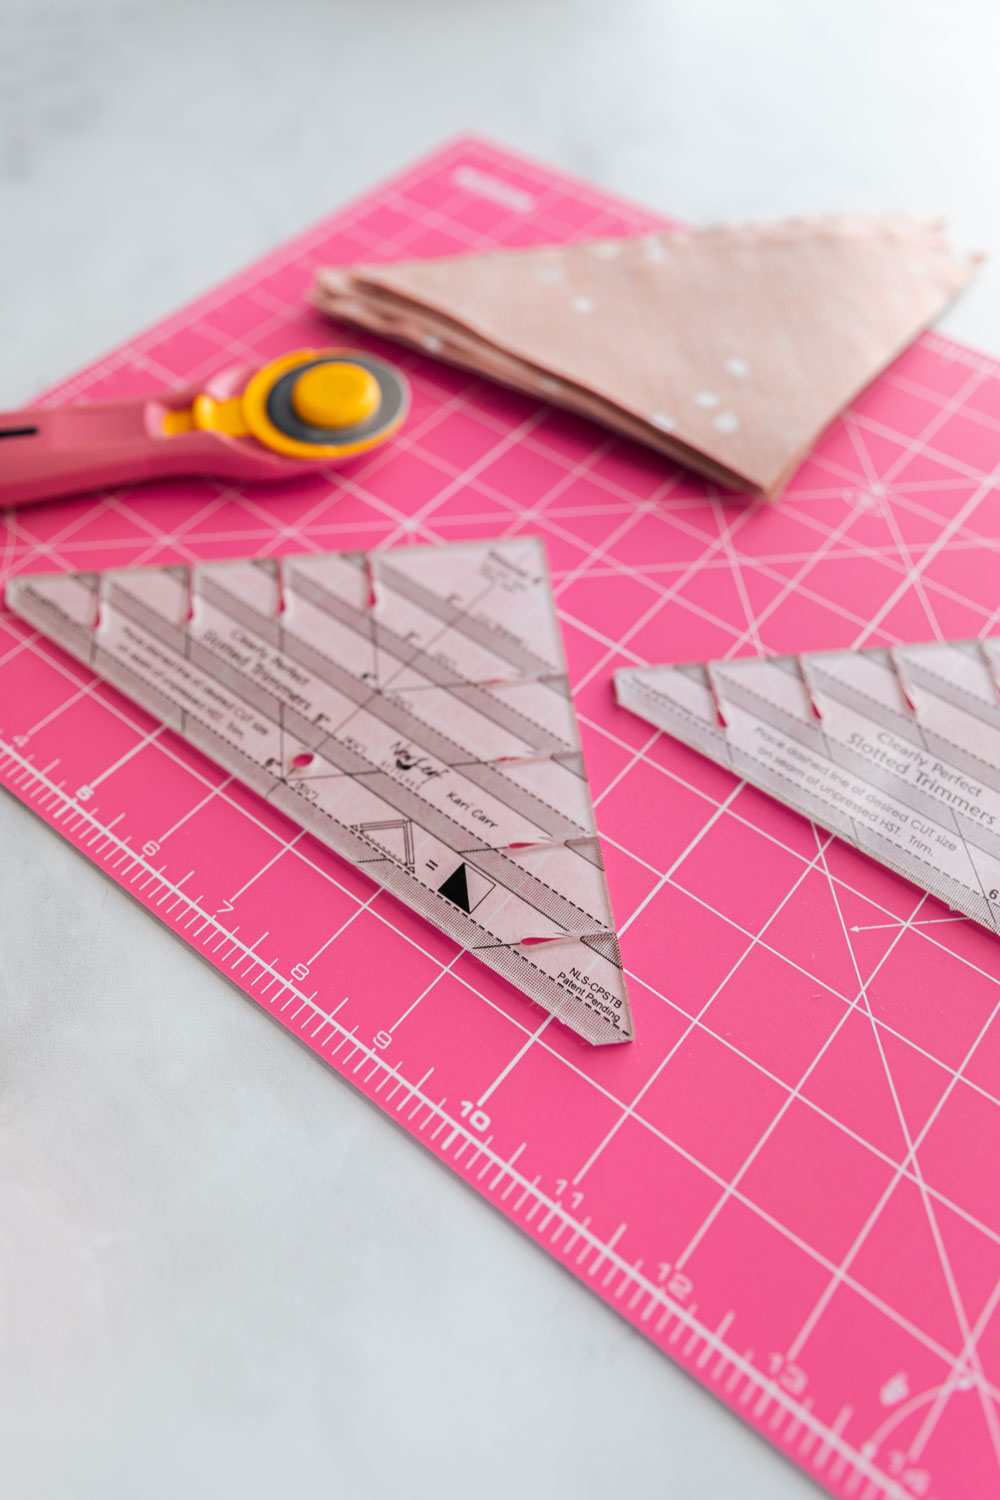 The best tutorial on how to trim half square triangles for quilting! Make perfect HSTs every time with this sewing method. suzyquilts.com #quilting #hsts